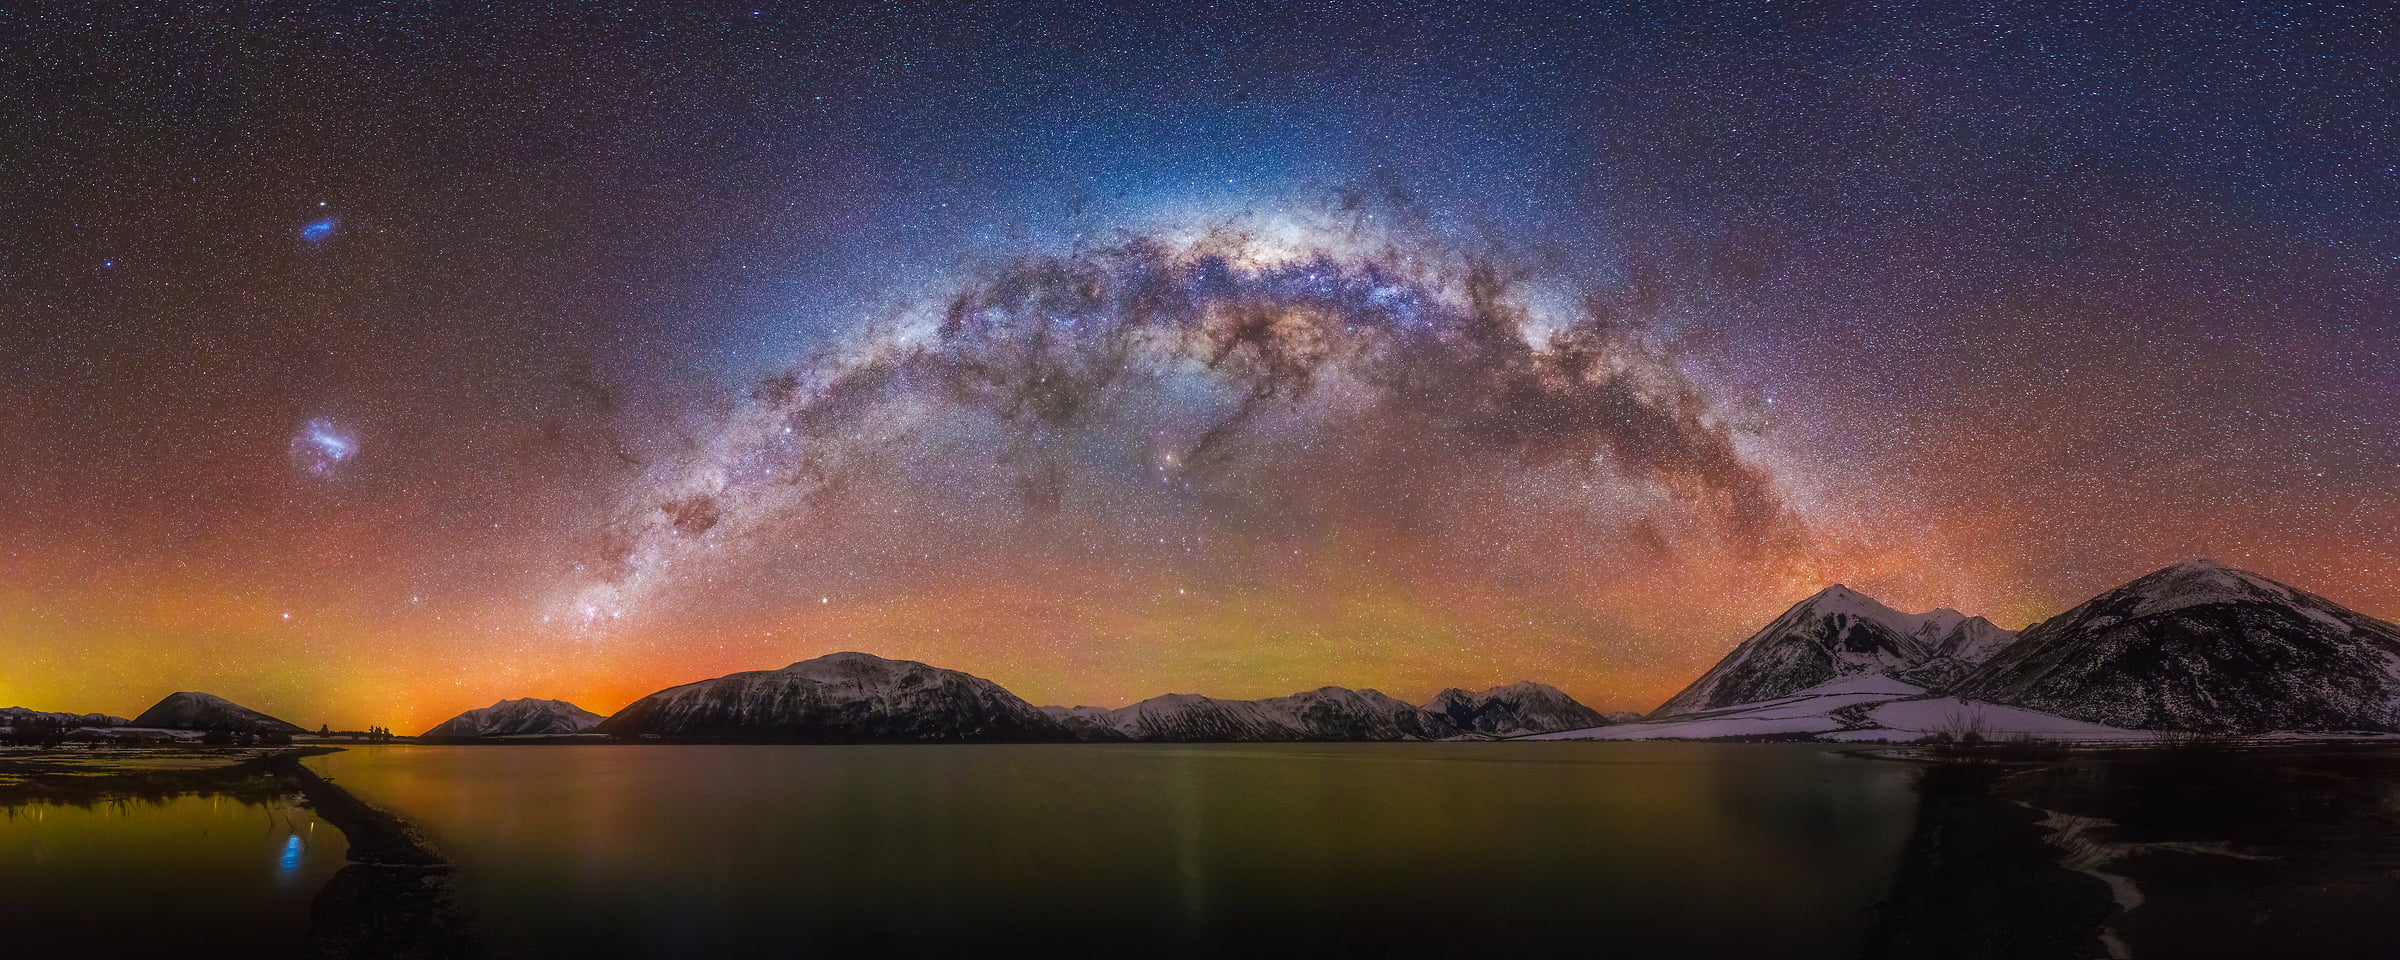 161 megapixels! A very high resolution, large-format VAST photo print of the night sky, milky way, and stars over mountains and a lake; fine art astrophotography landscape photo created by Paul Wilson in Lake Coleridge, New Zealand